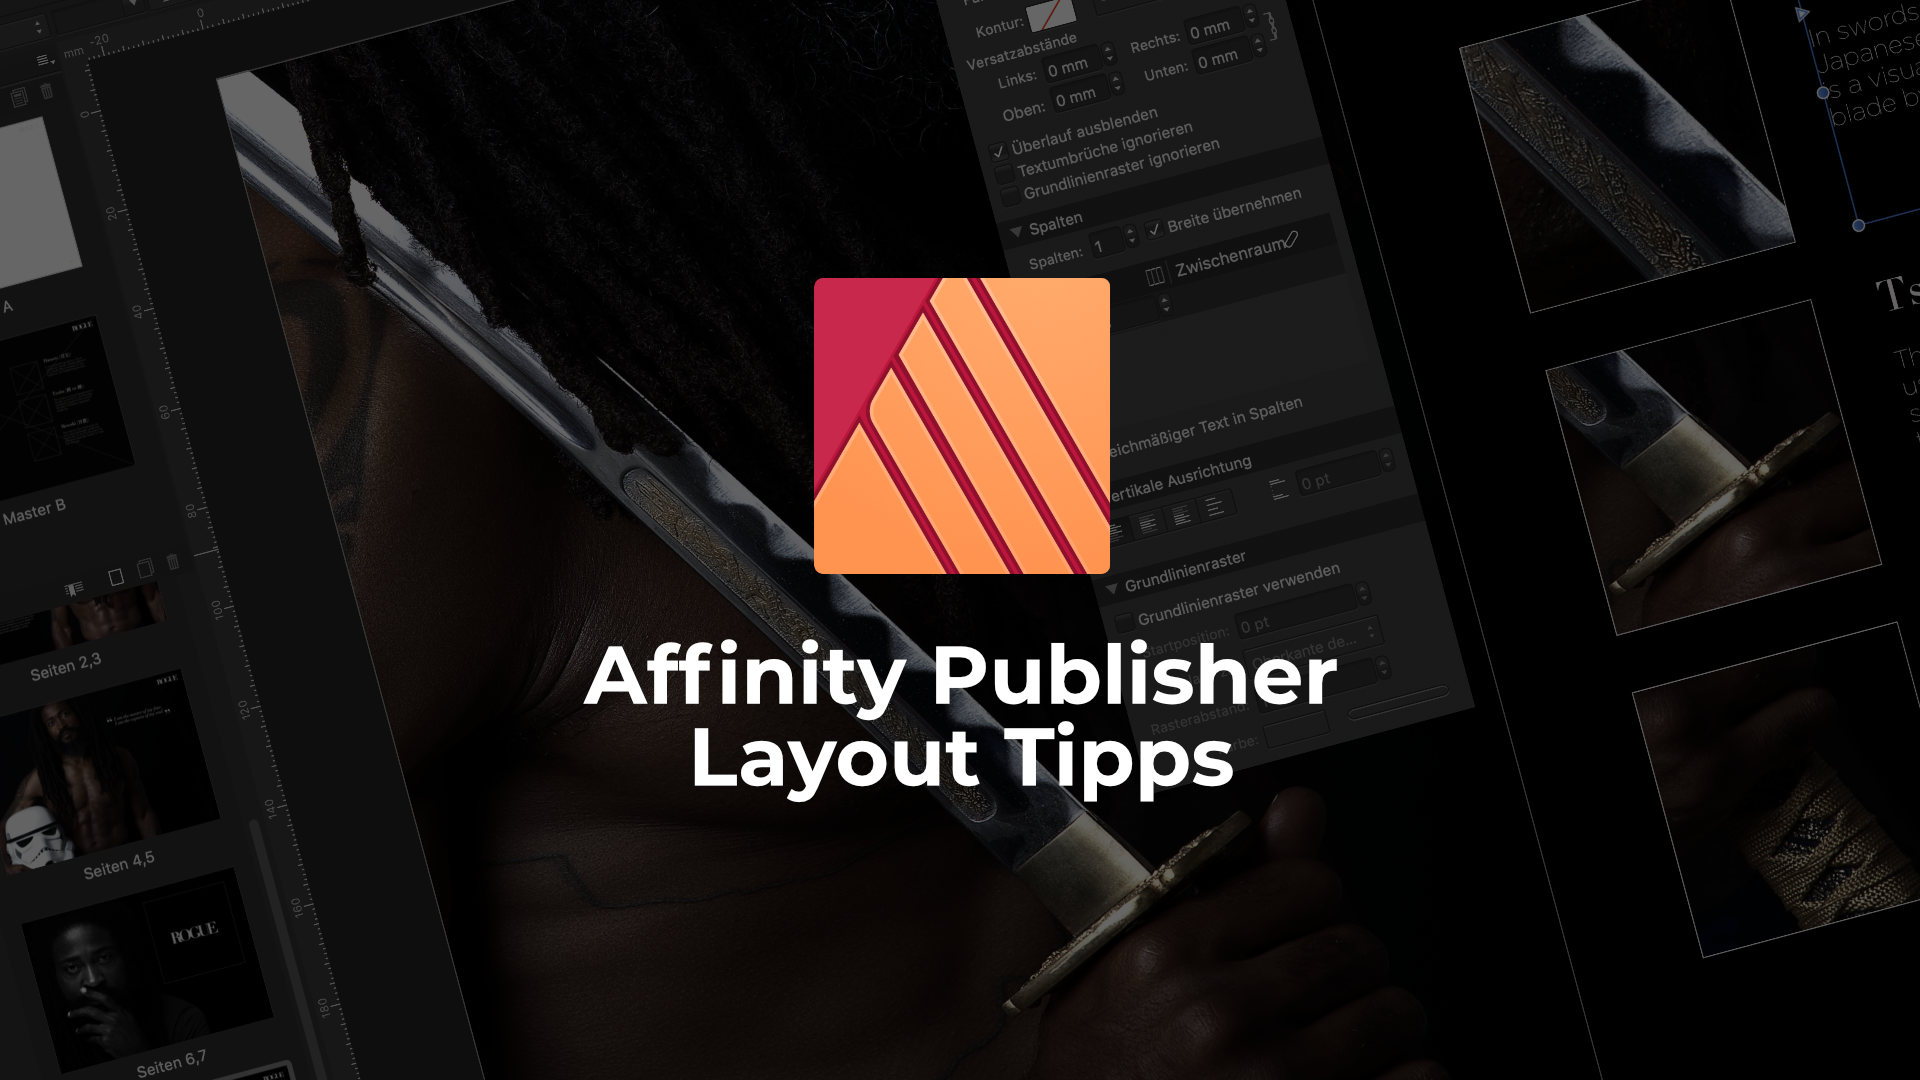 when will affinity publisher be released